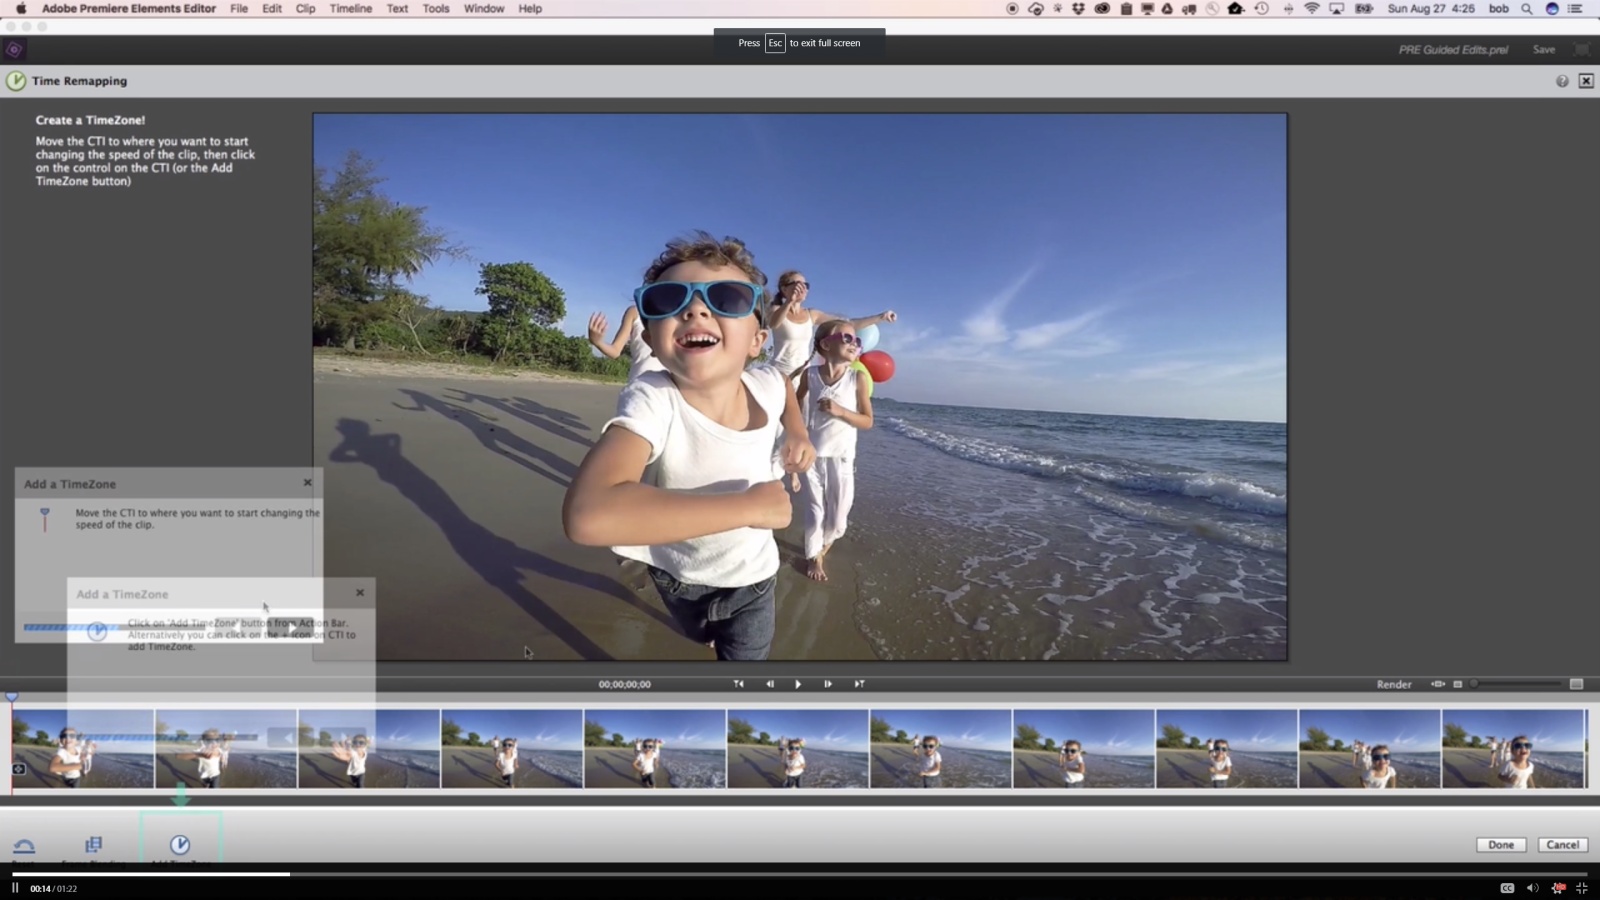 Adobe Photoshop Elements 15 For Mac free. download full Version